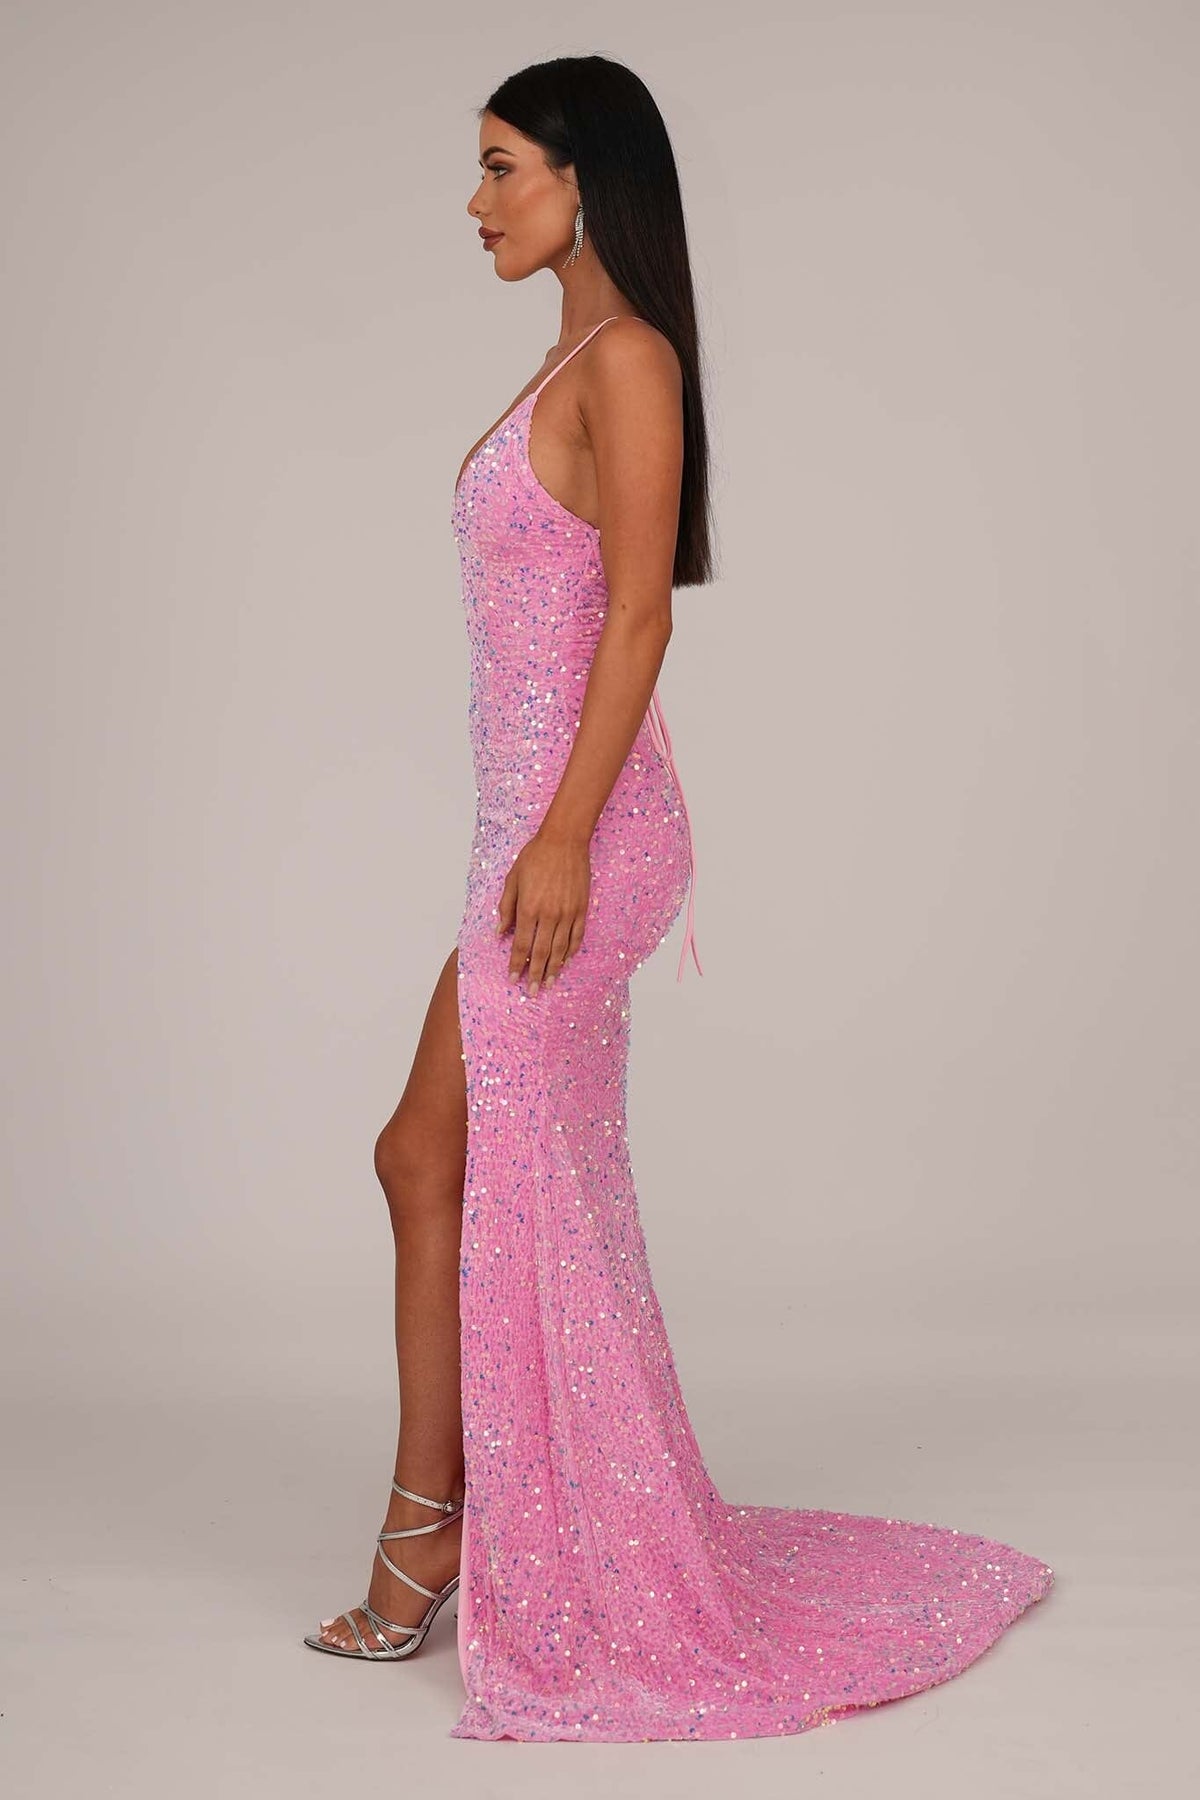 Side Image of Pink Velvet Sequin Full Length Evening Gown with V Neckline, Thin Shoulder Straps, Thigh High Side Split and Lace Up Open Back